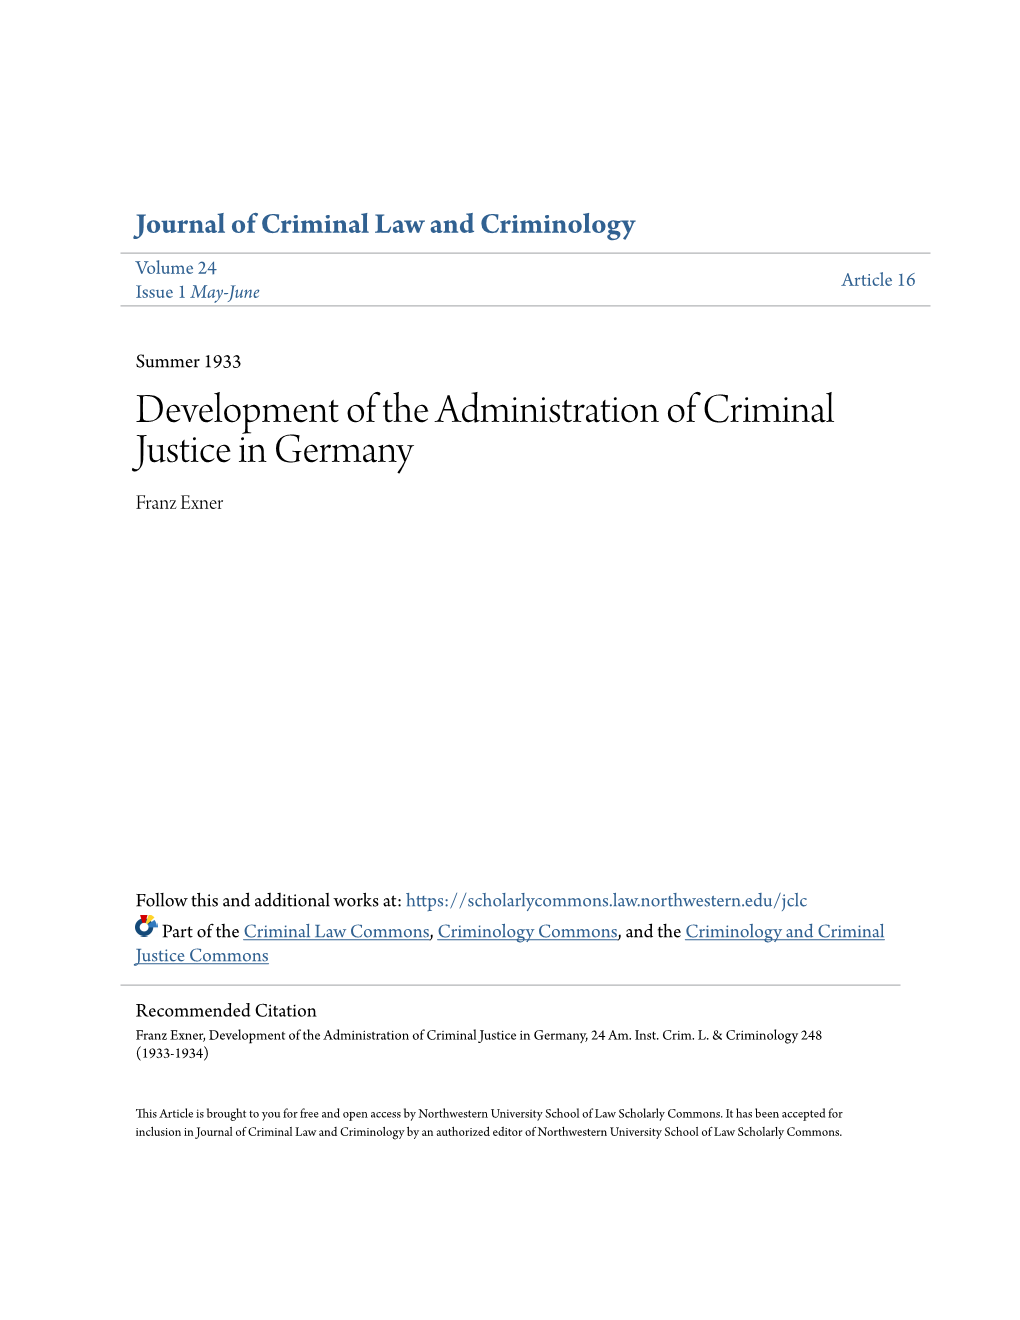 Development of the Administration of Criminal Justice in Germany Franz Exner